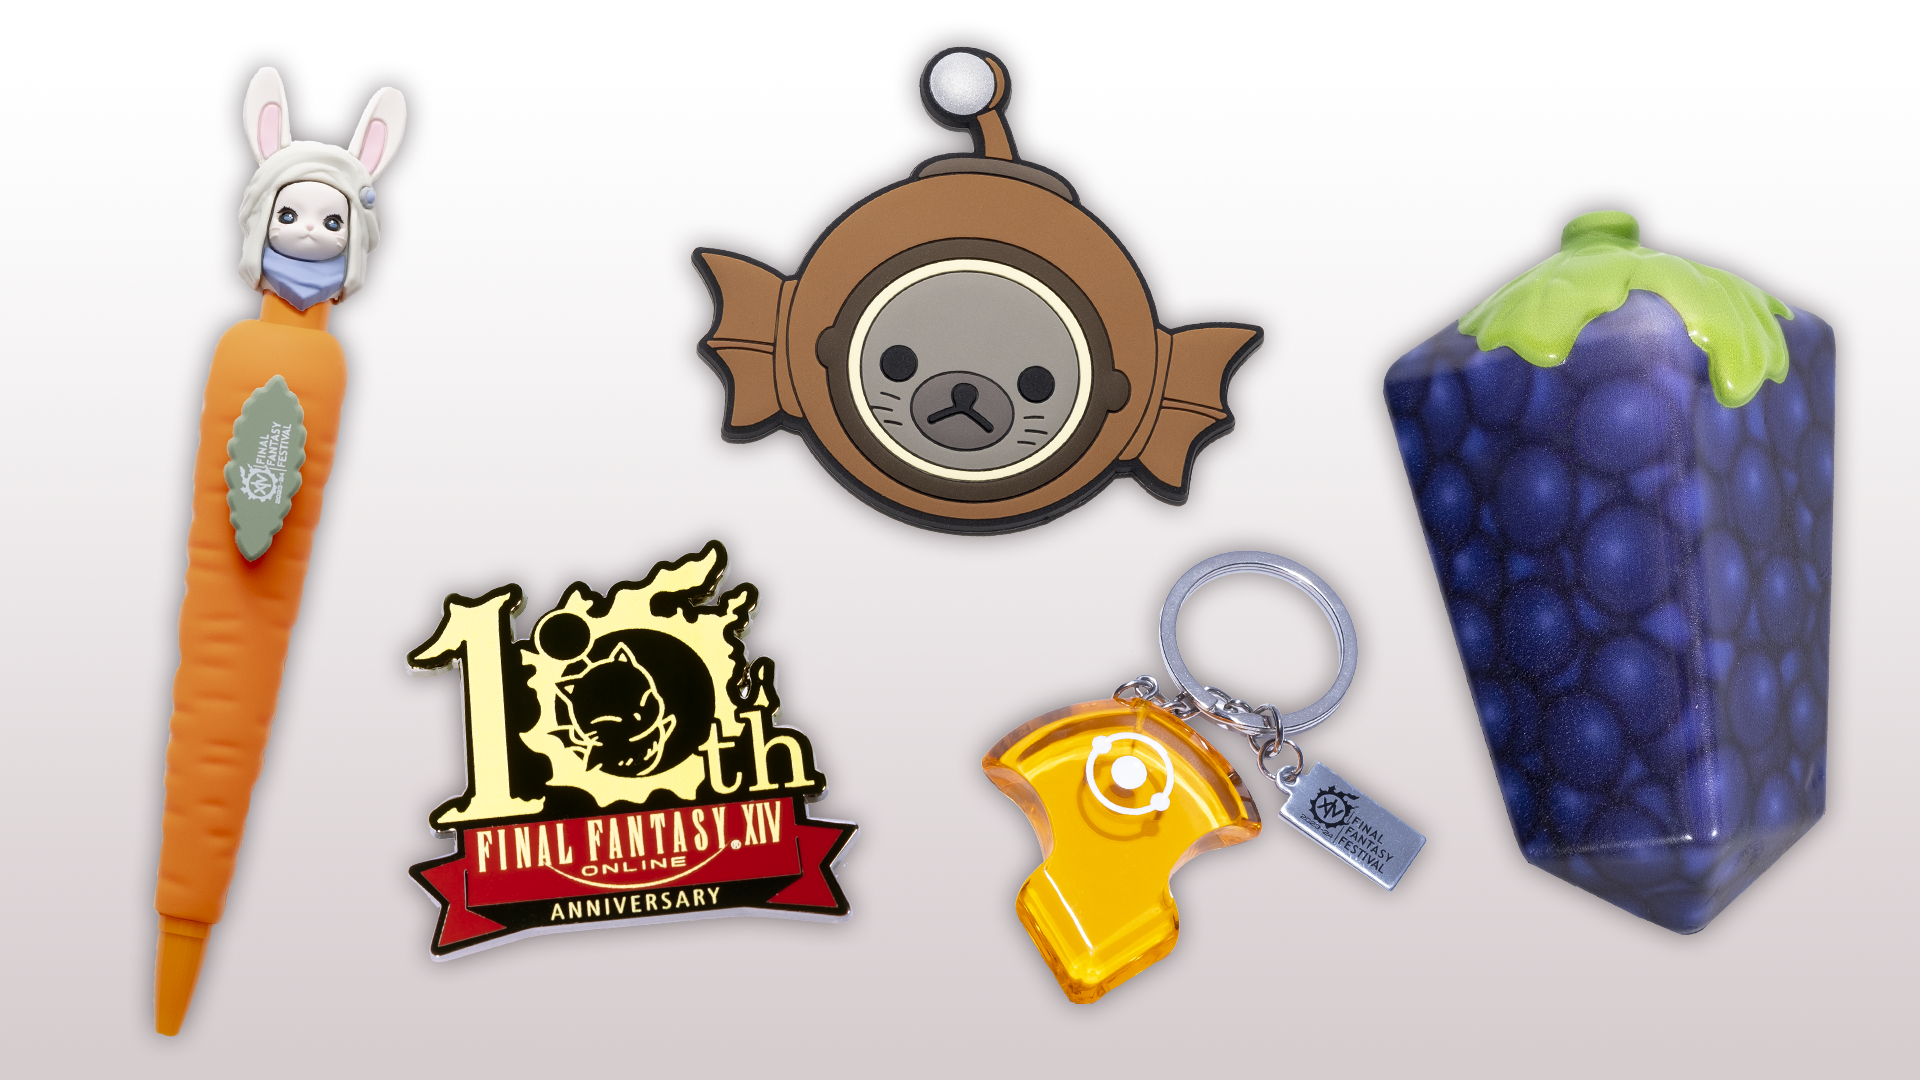 A collage showcasing the goody bag items: loporrit-themed pen, grebuloff magnet, azem's crystal keychain, 10th anniversary pin, and squishable Endwalker grapes.